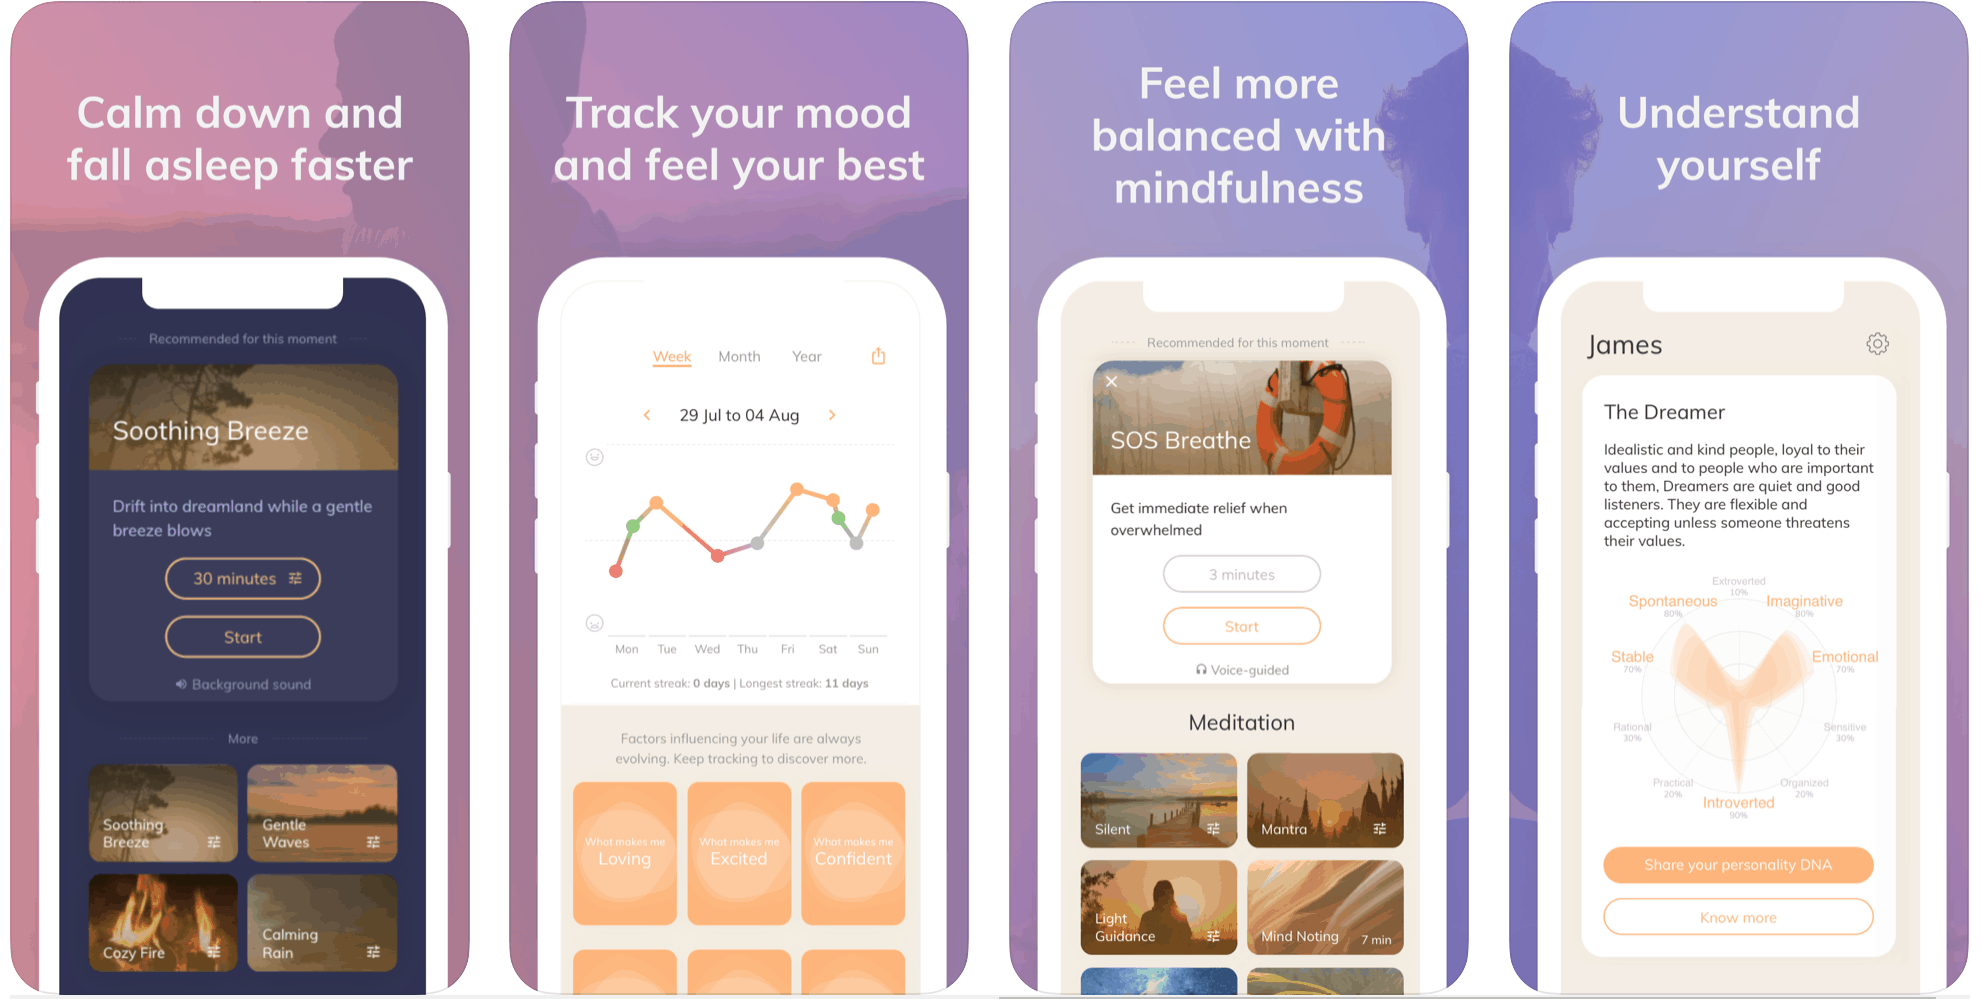 10 Best Therapy Apps to Better Your Mental Health Anywhere